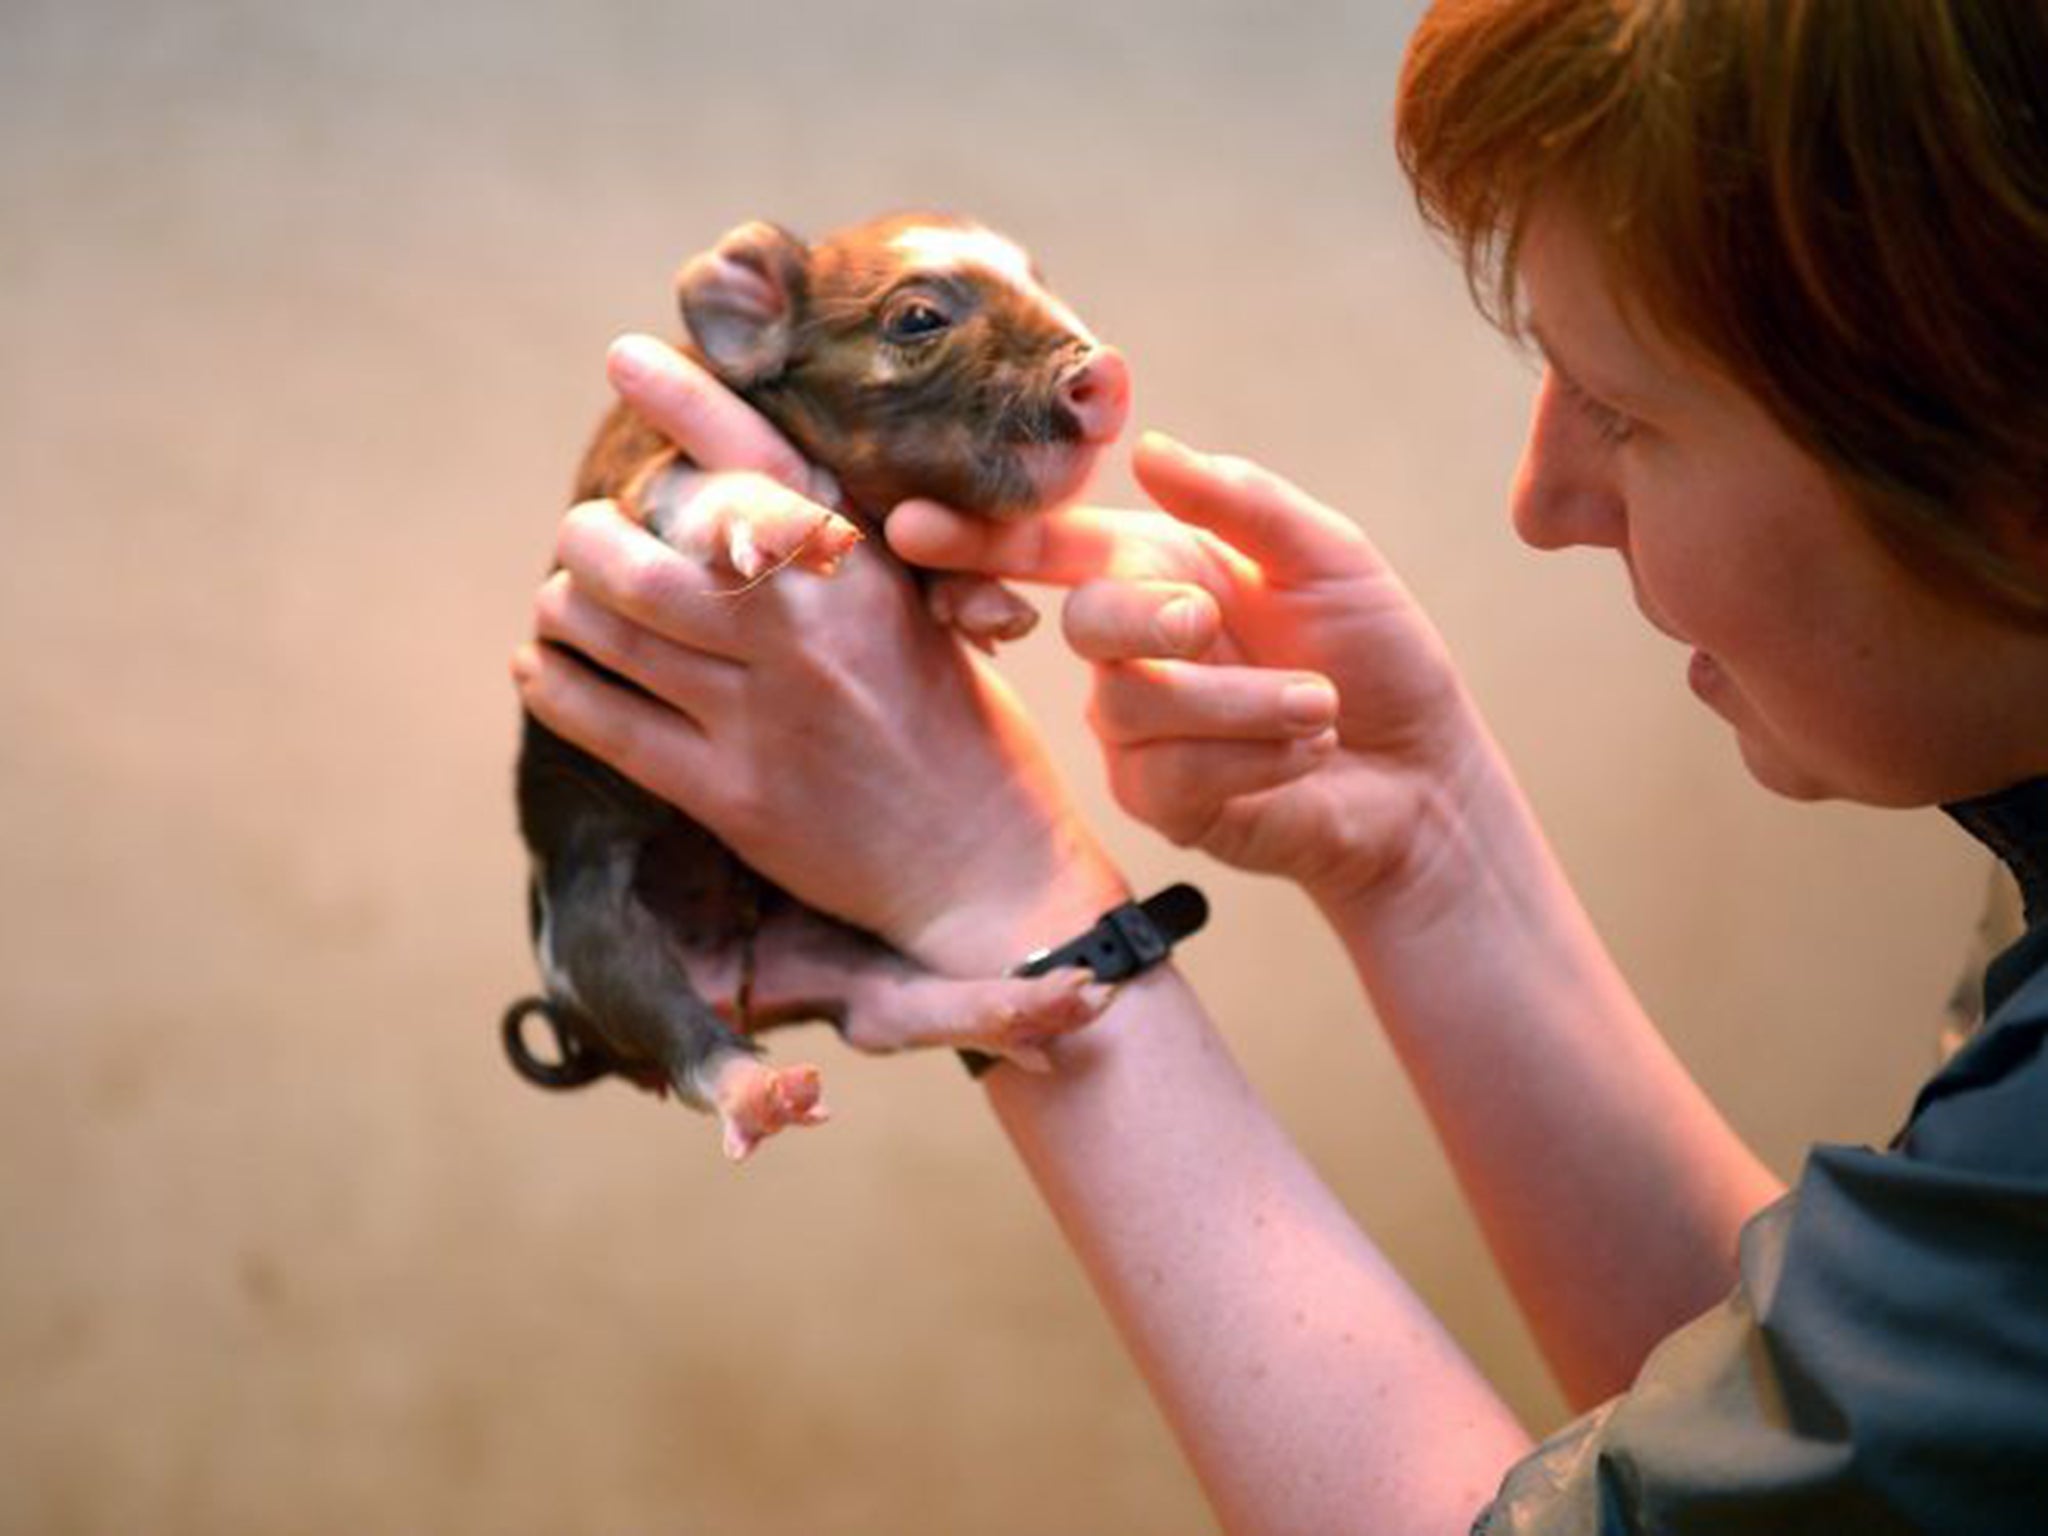 Miniature pigs ranked among the top three creatures with a predominant appeal to British women